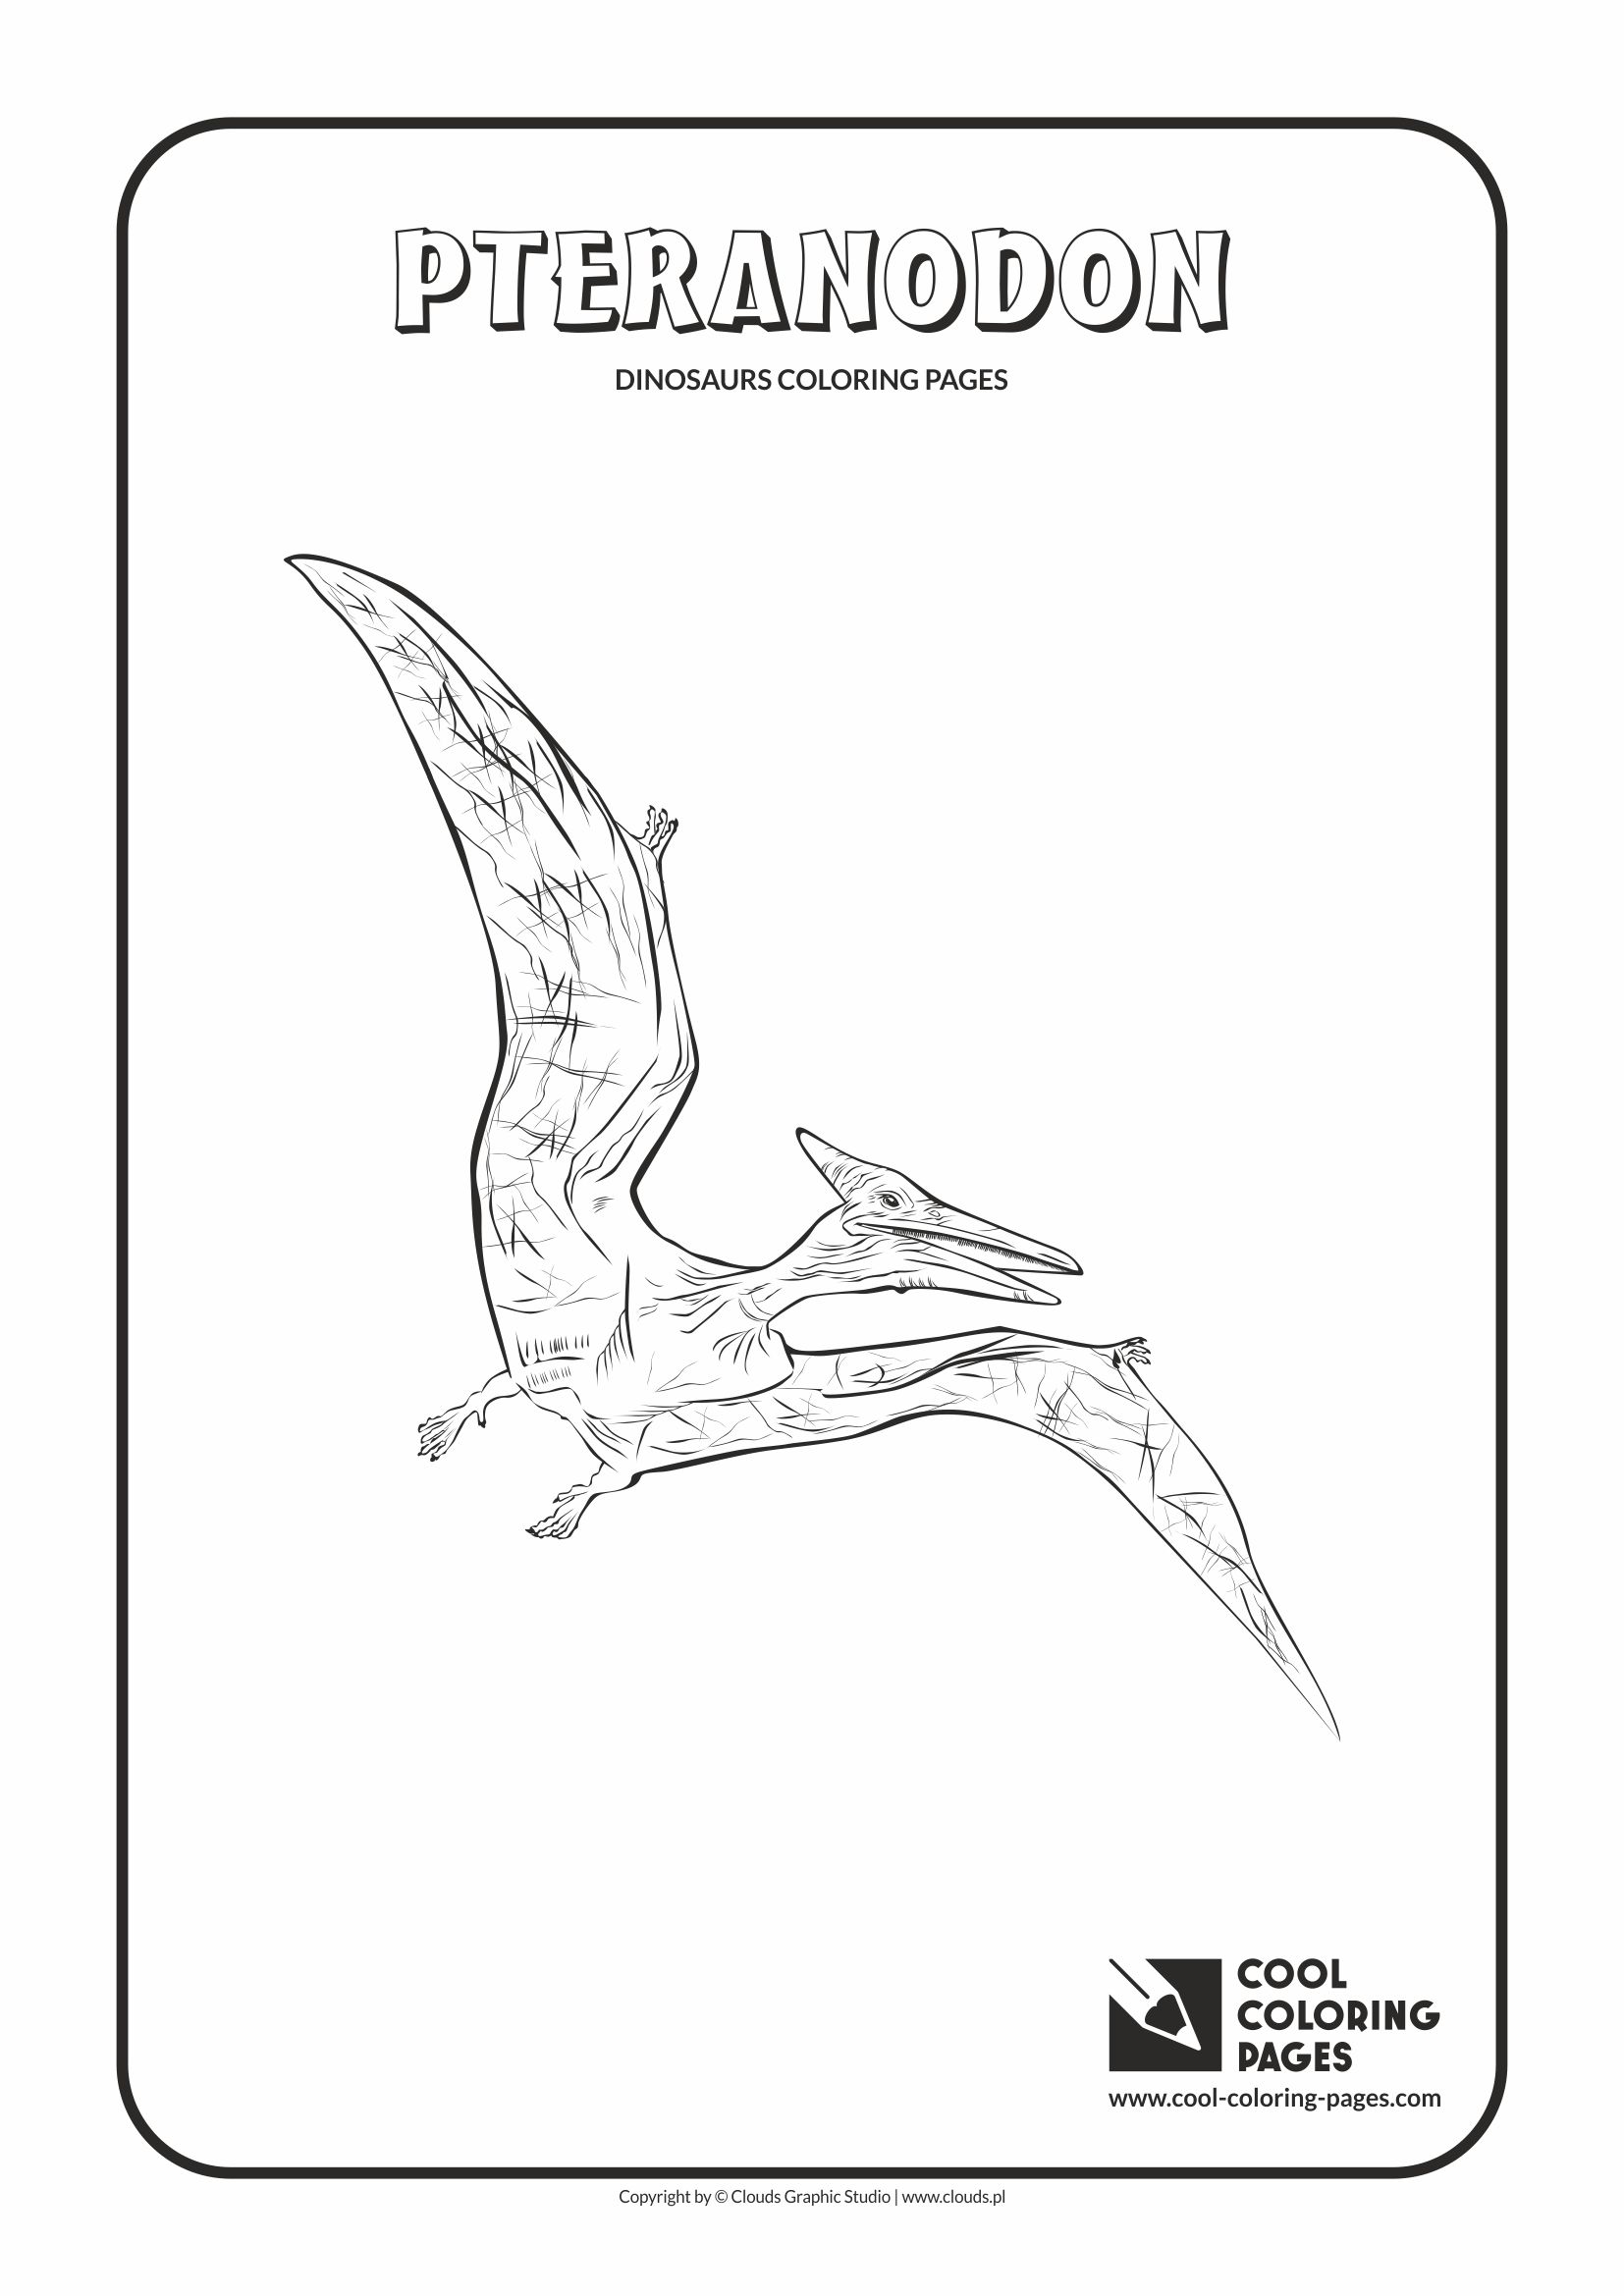 Cool coloring pages dinosaurs coloring pages